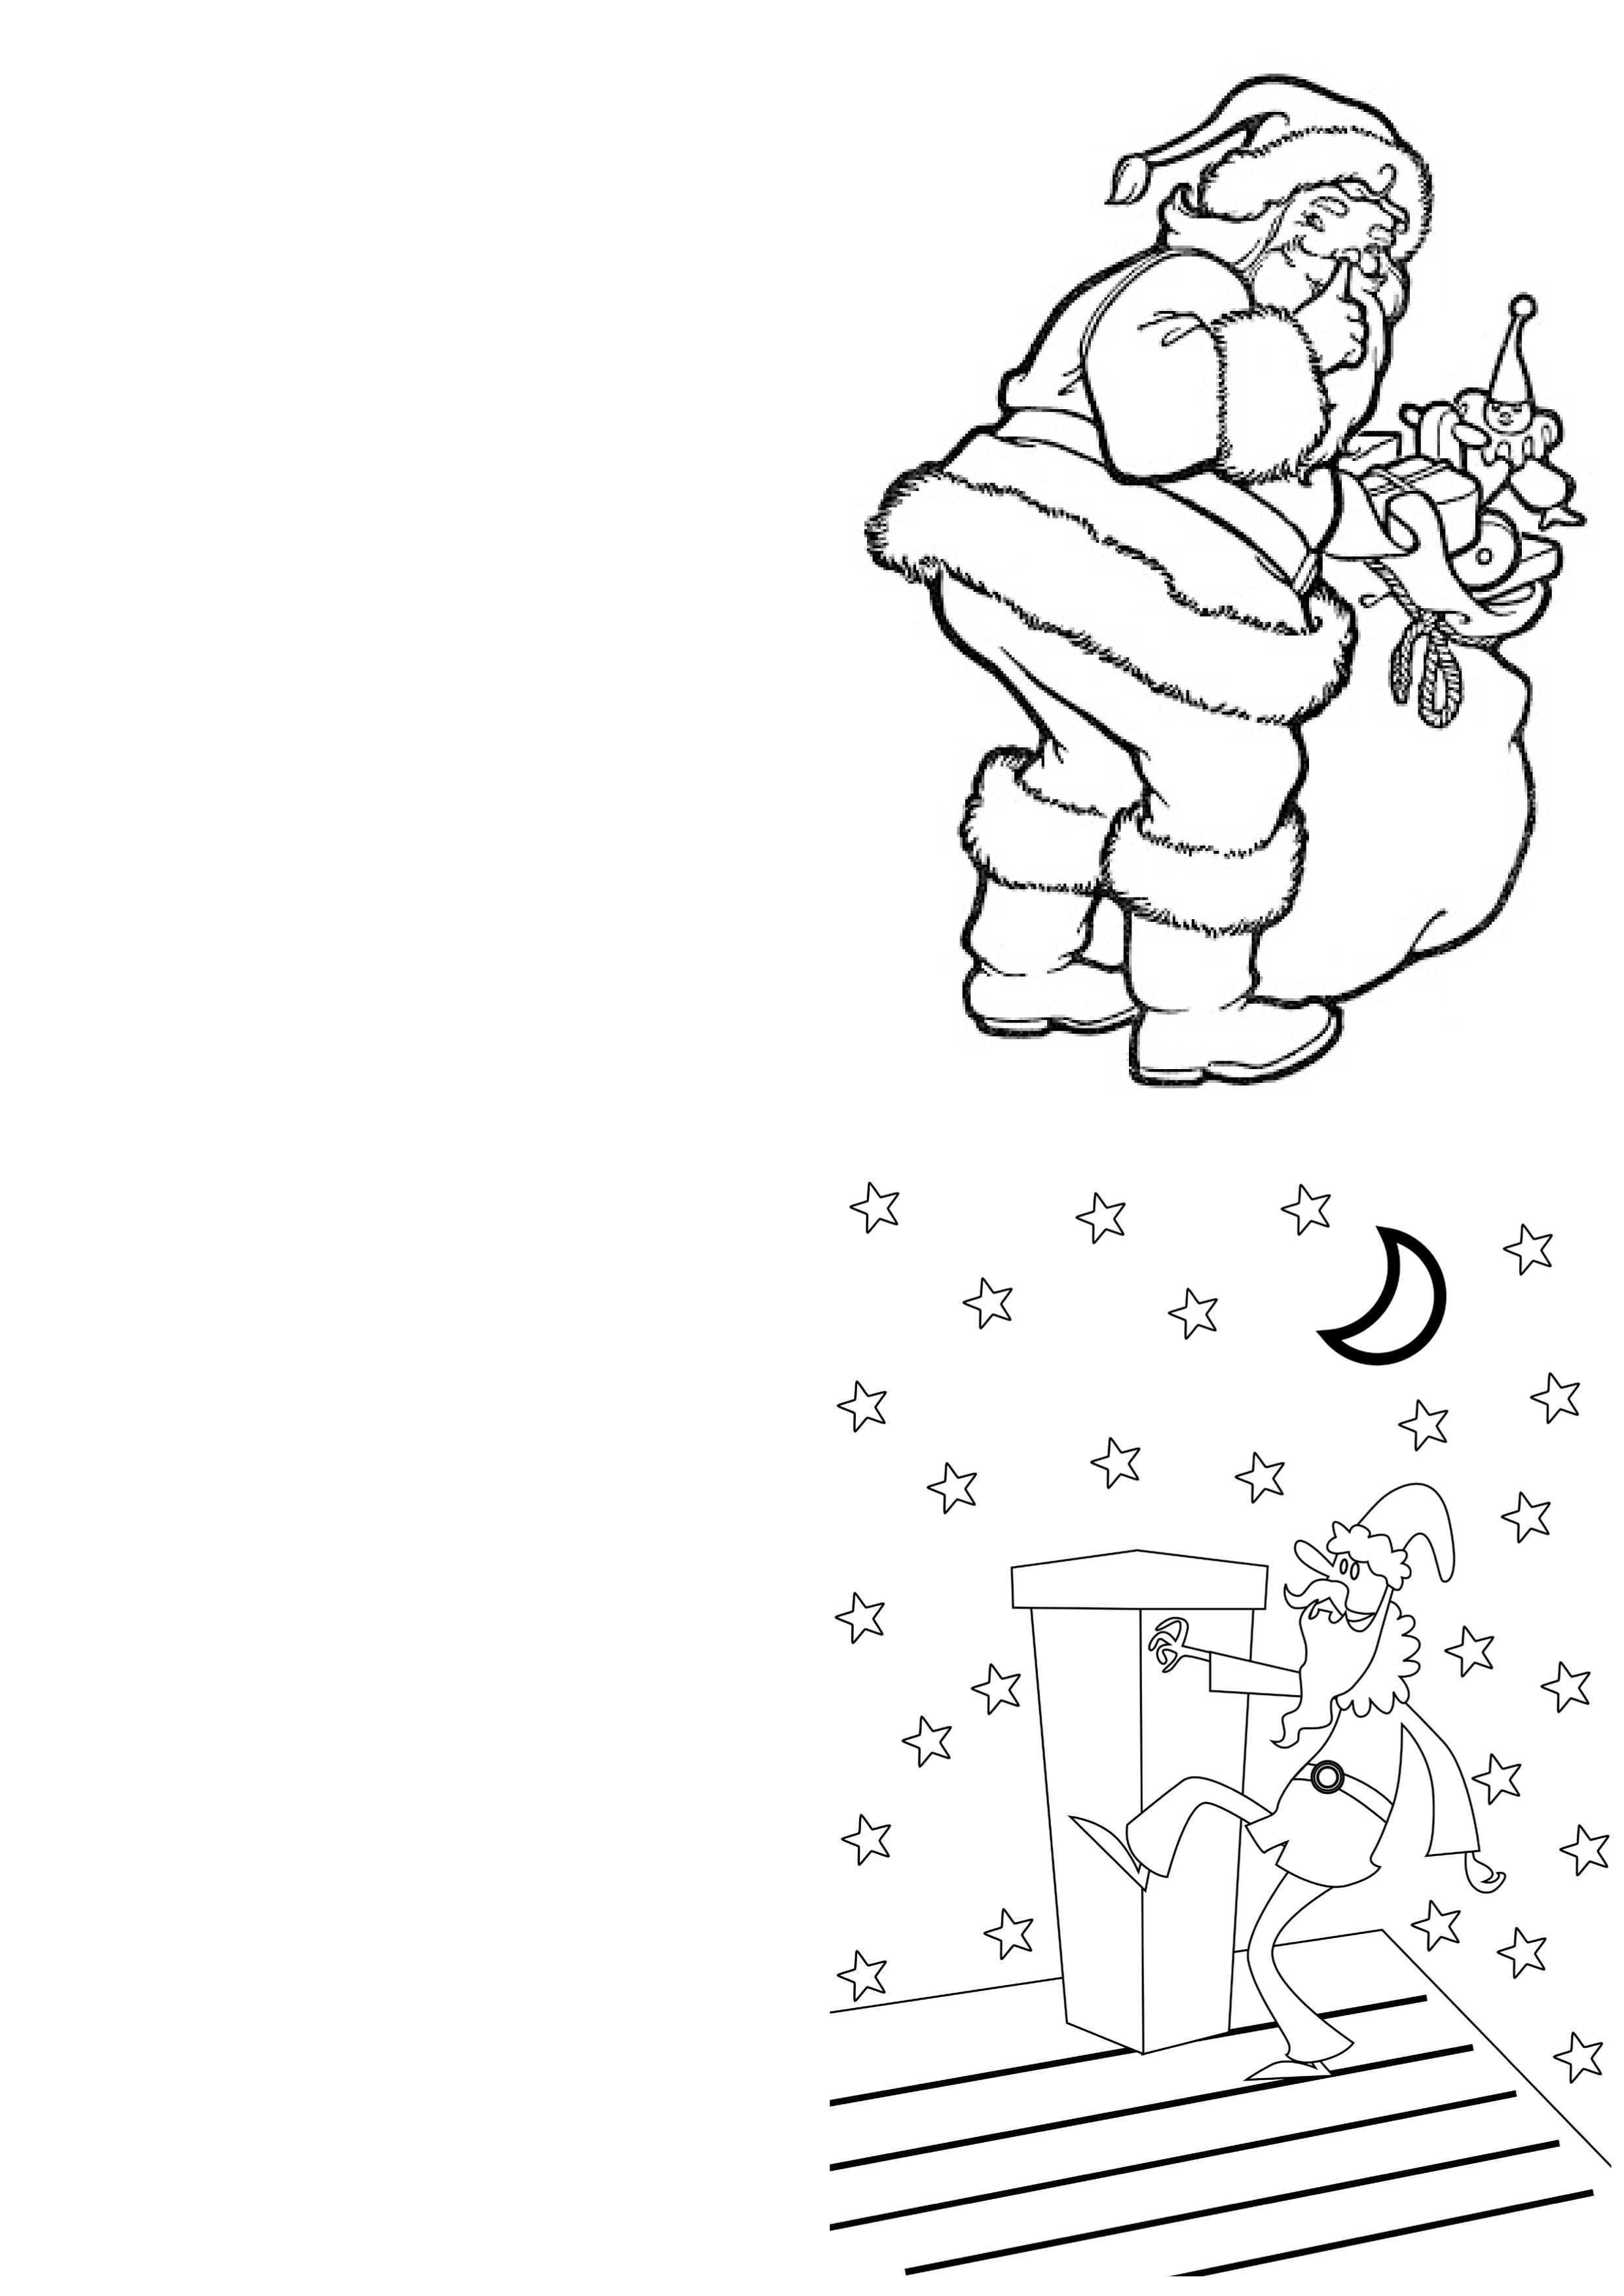 23 Free Christmas Card Template For Colouring in Photoshop by Christmas Card Template For Colouring